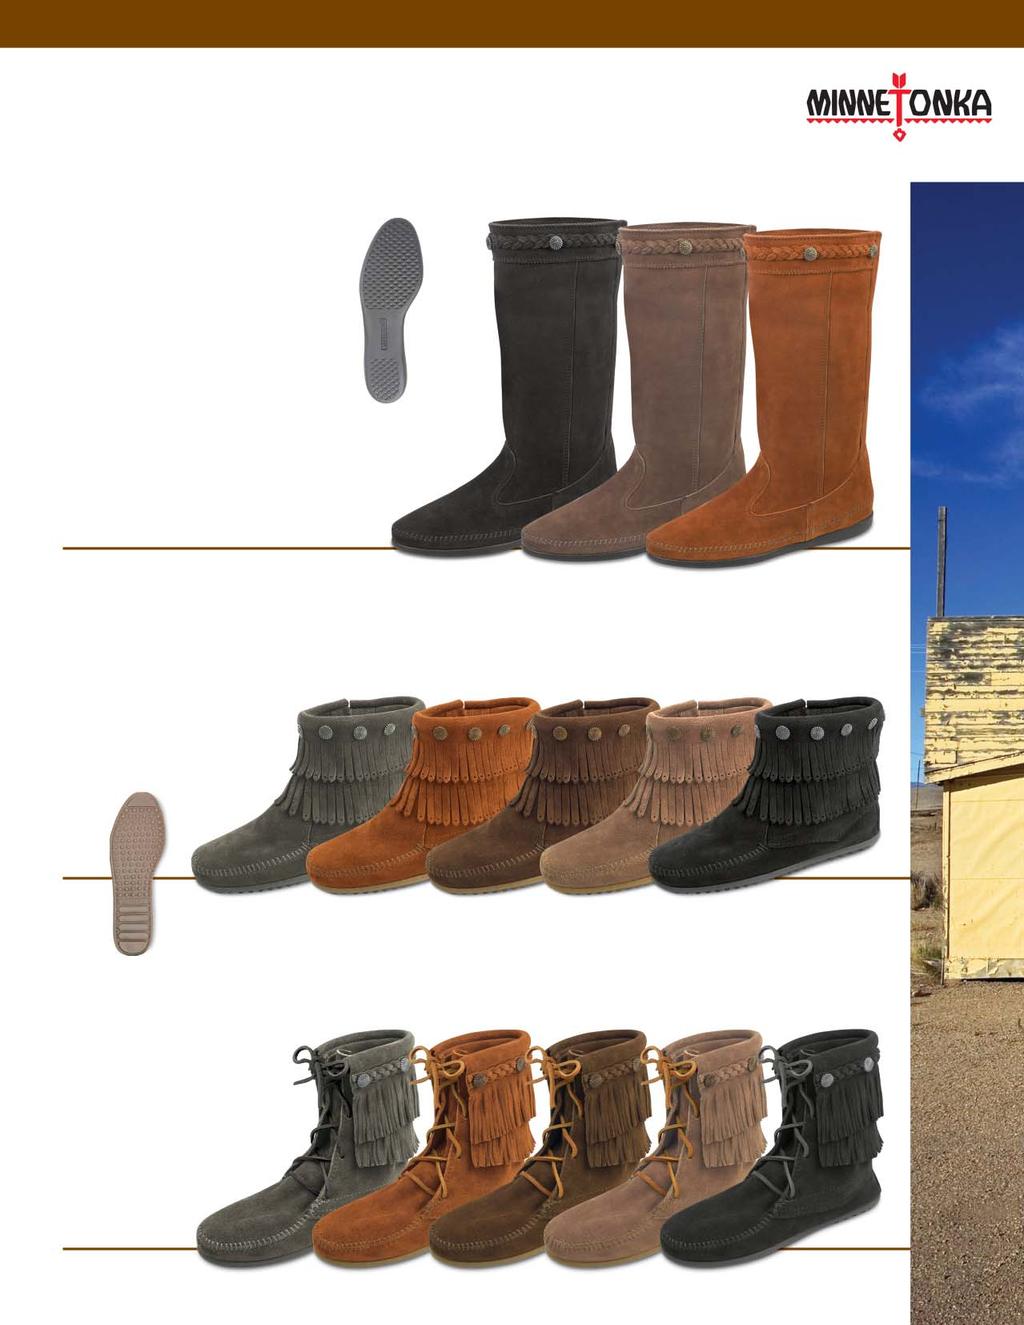 s All Styles In Stock For Immediate Delivery. More than just boots - our fringe boots feature authentic designs that become a part of you. In natural suedes and genuine moccasin soul.